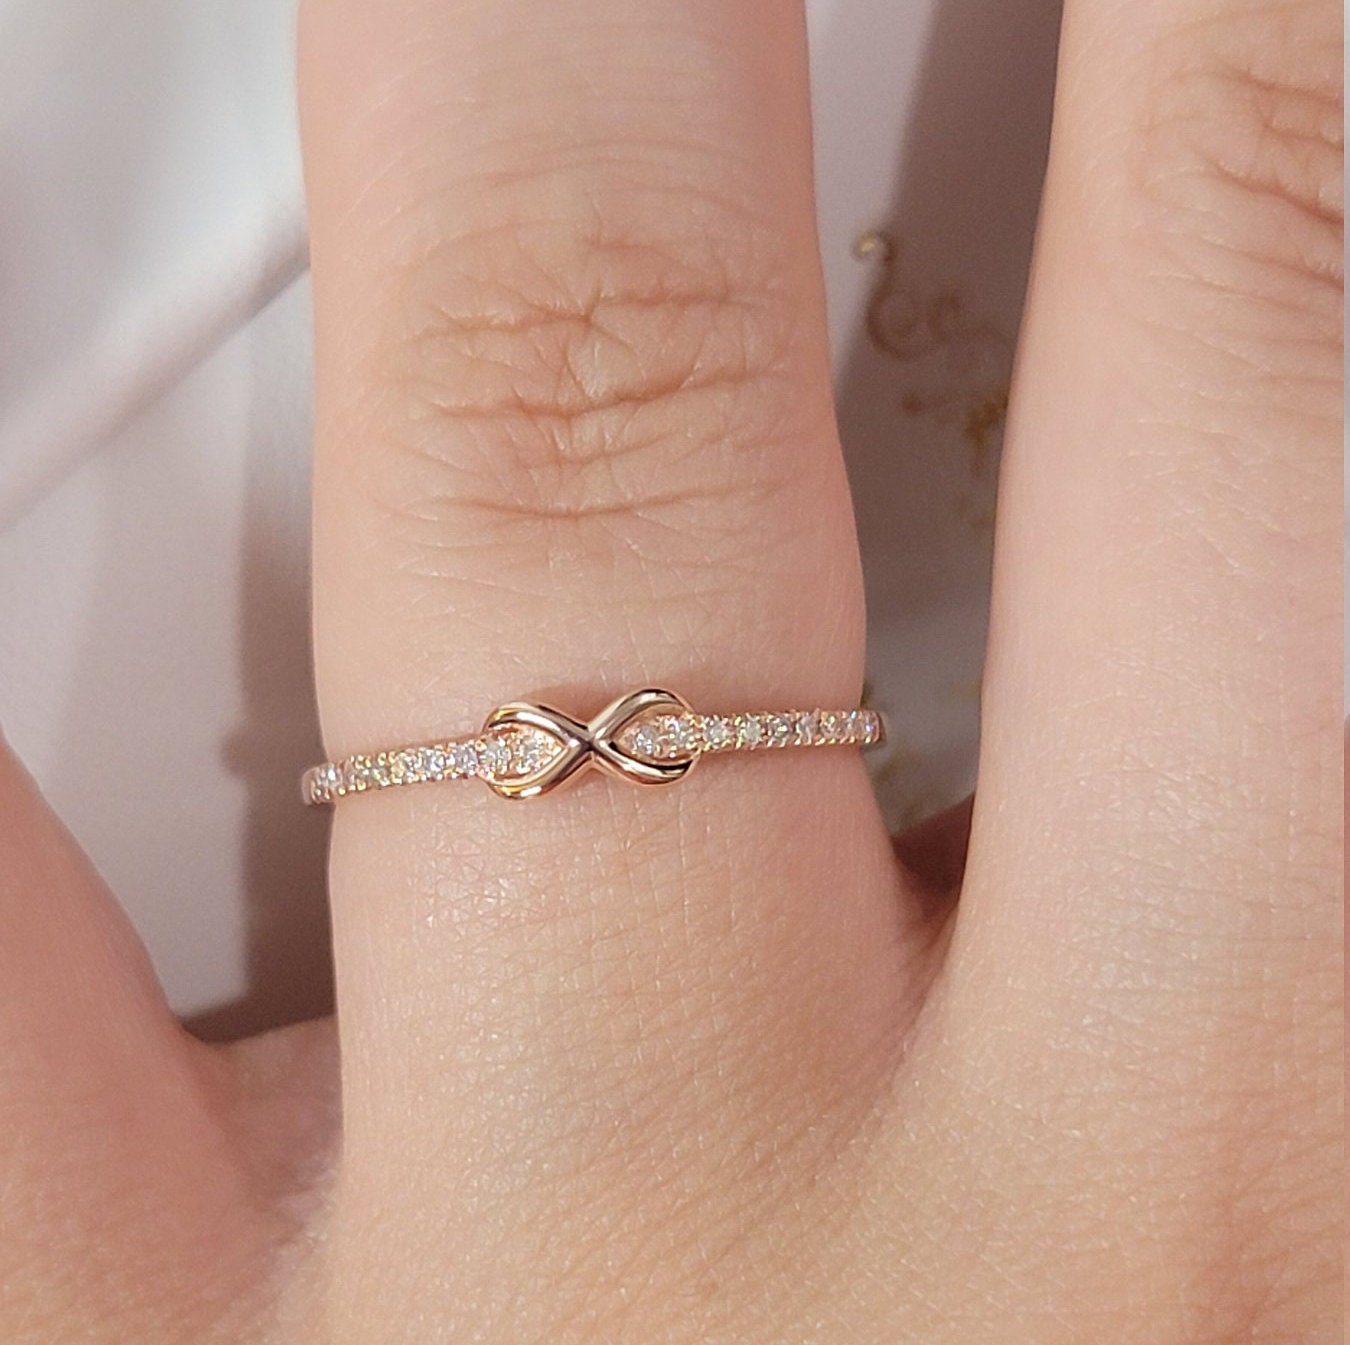 Infinity Style Diamond Ring in 14k Solid Gold / Dainty Diamond Wedding Band / Infinity Symbol Ring for Women